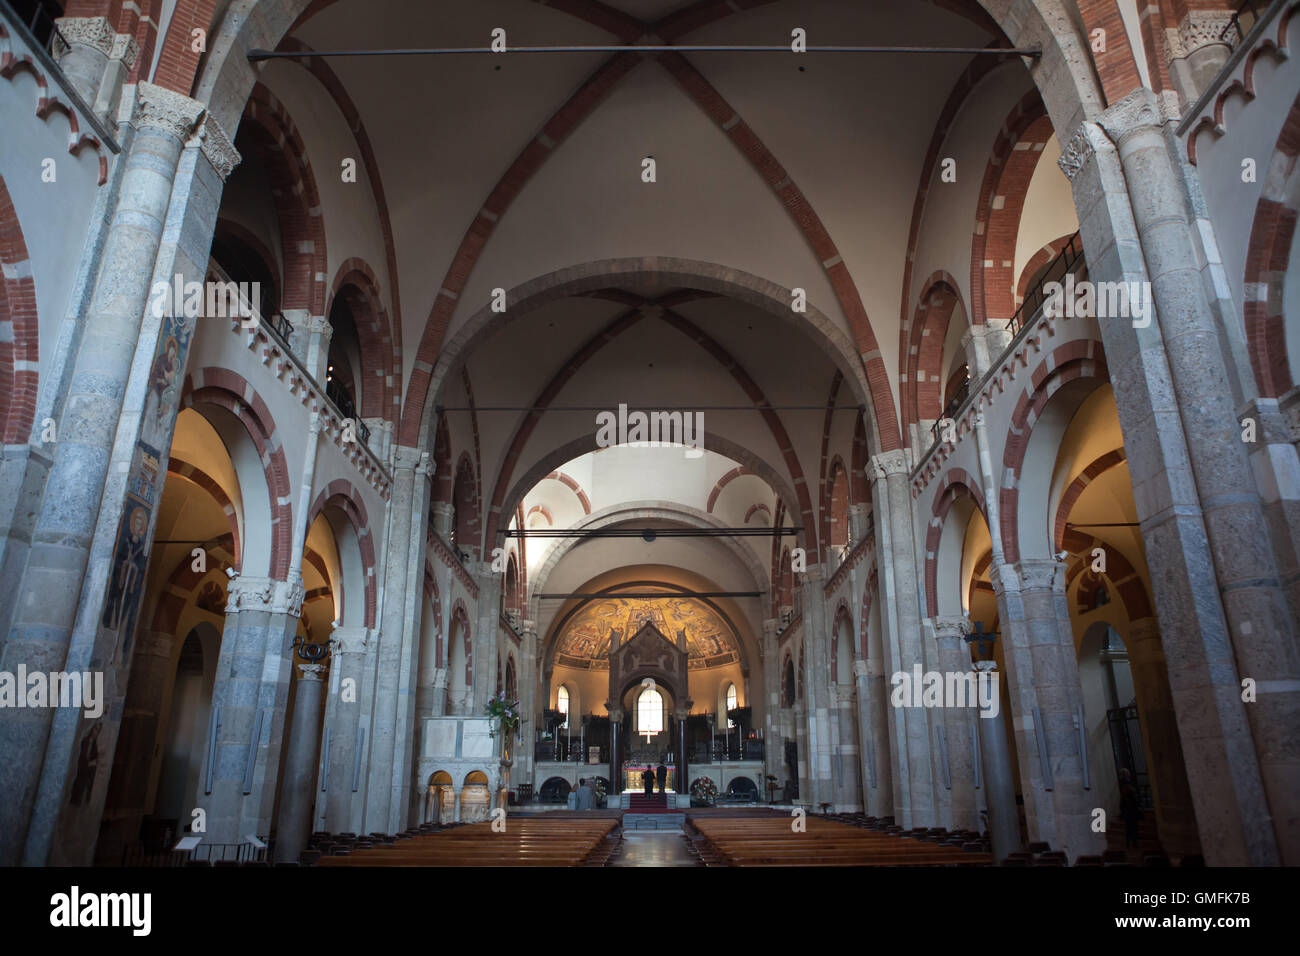 Main nave of the Basilica di Sant'Ambrogio in Milan, Lombardy, Italy. Stock Photo